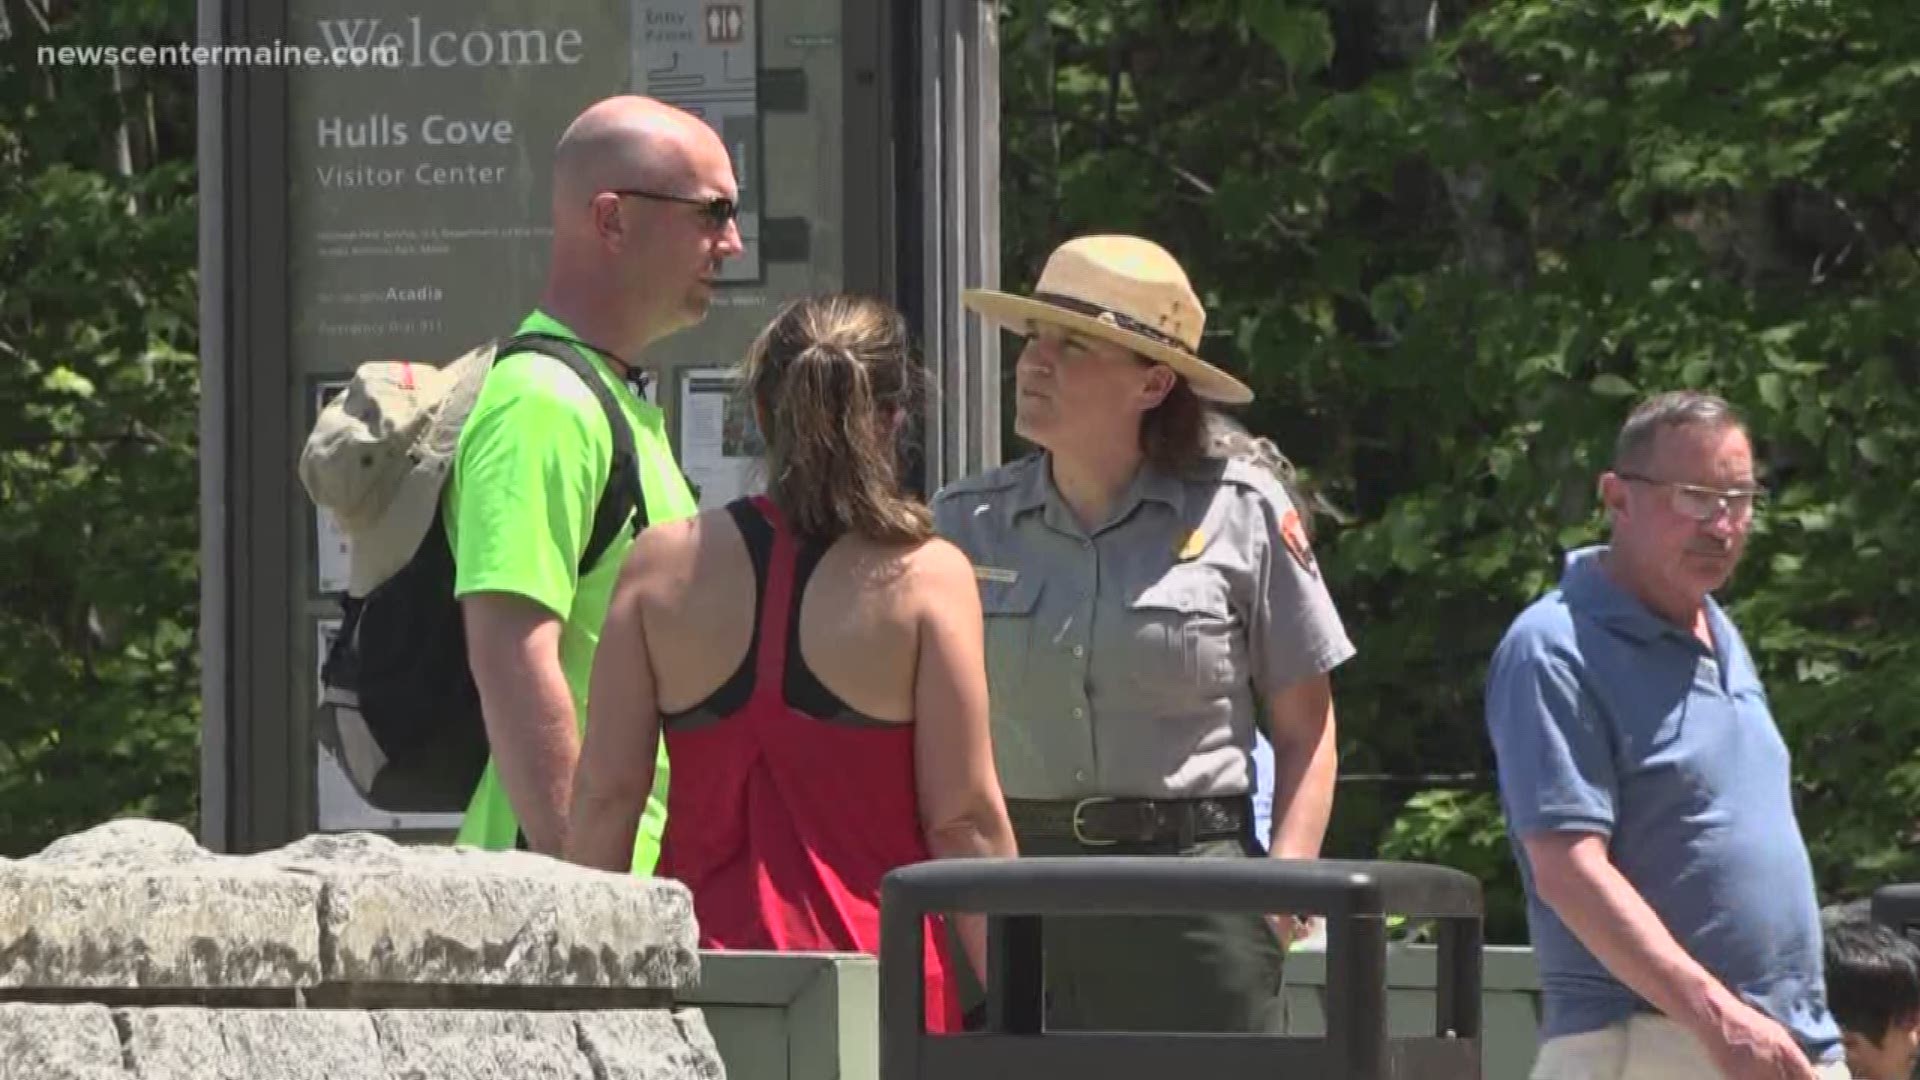 The Fourth of July kicks off a busy summer tourist season at Acadia National Park.